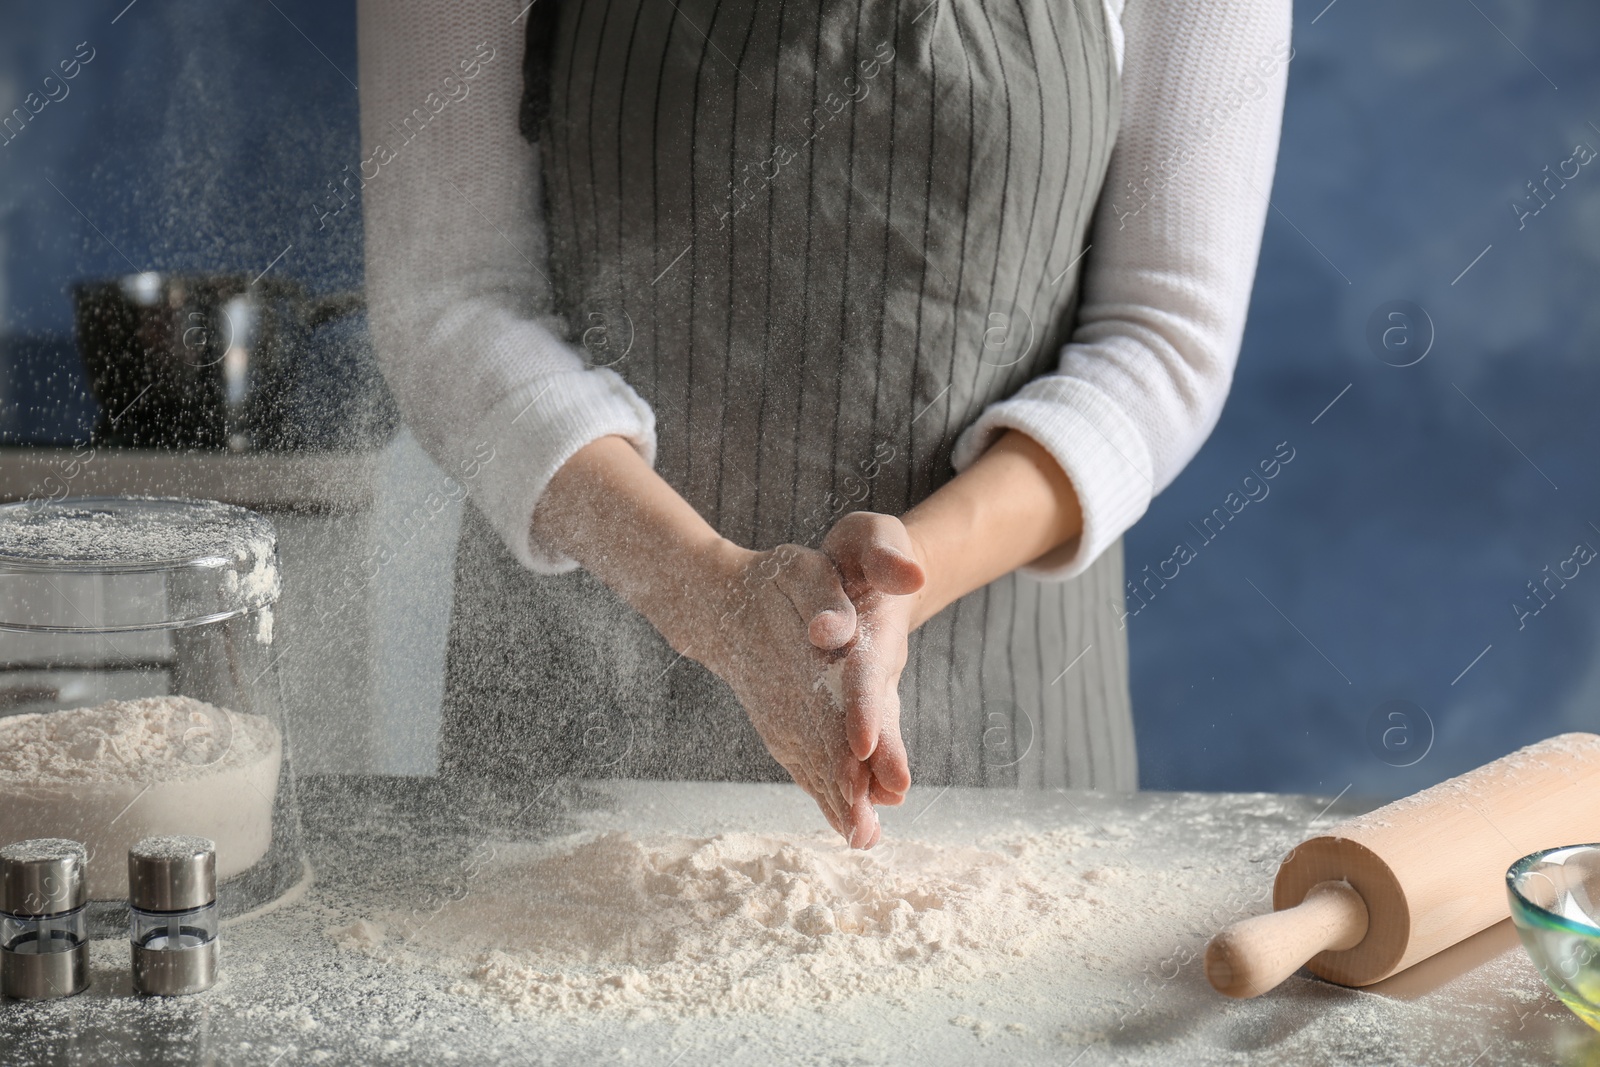 Photo of Woman sprinkling flour over table in kitchen